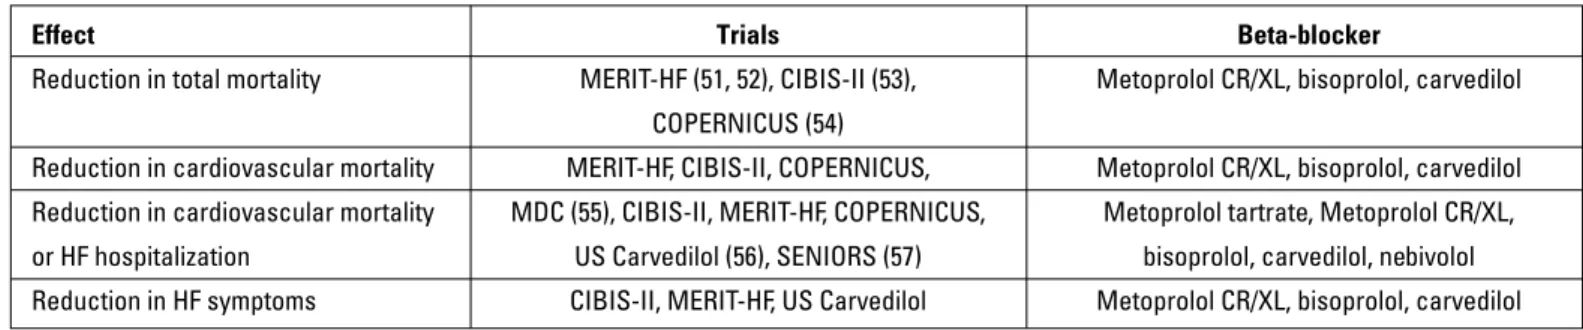 Table 11. Favorable clinical outcomes obtained from clinical trials on beta-blockers use in HF